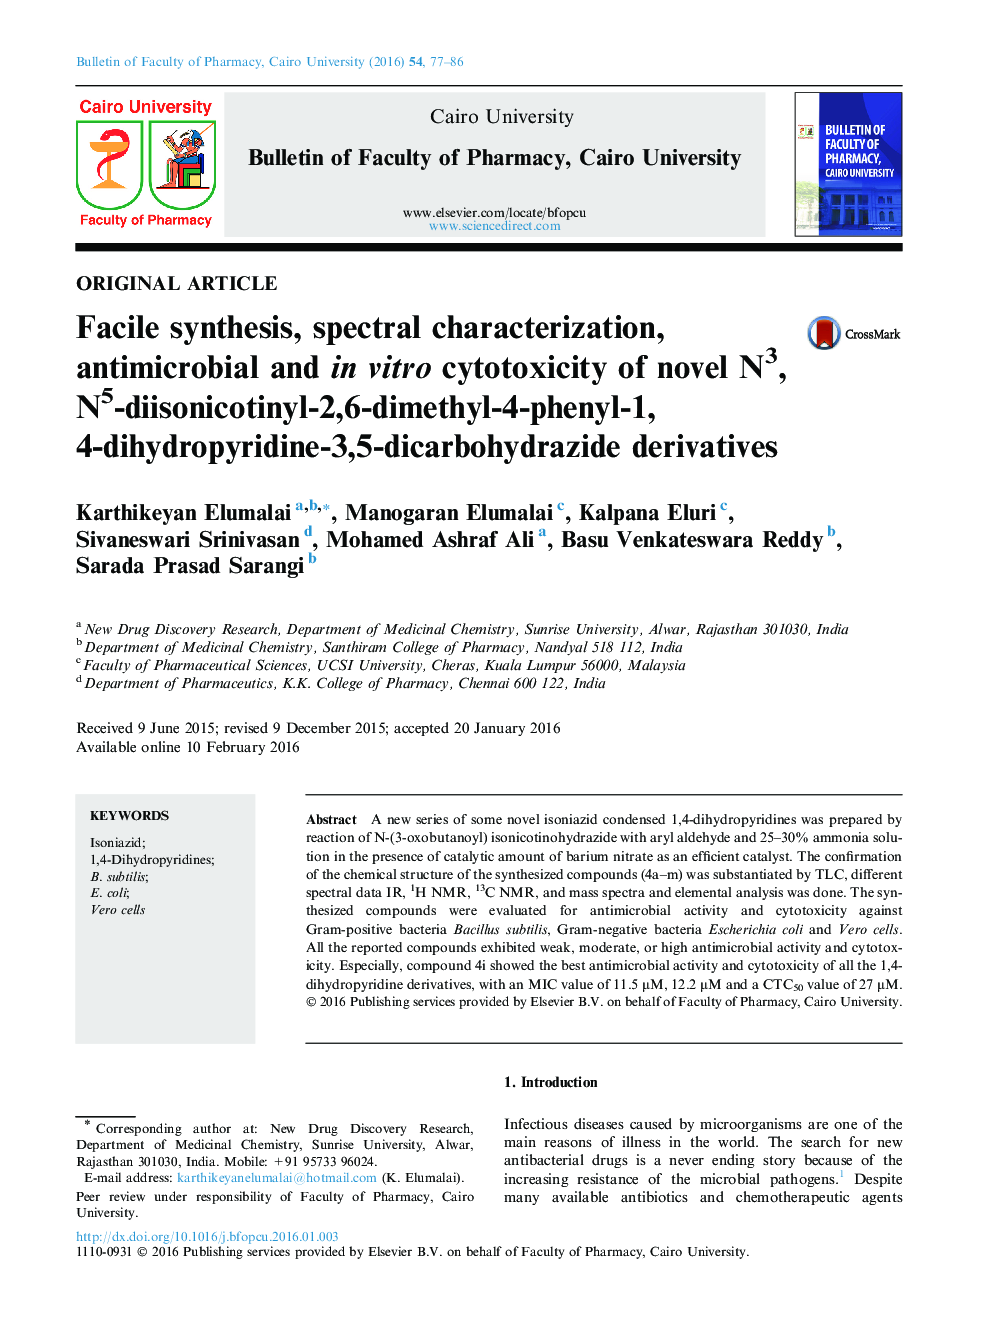 Facile synthesis, spectral characterization, antimicrobial and in vitro cytotoxicity of novel N3,N5-diisonicotinyl-2,6-dimethyl-4-phenyl-1,4-dihydropyridine-3,5-dicarbohydrazide derivatives 